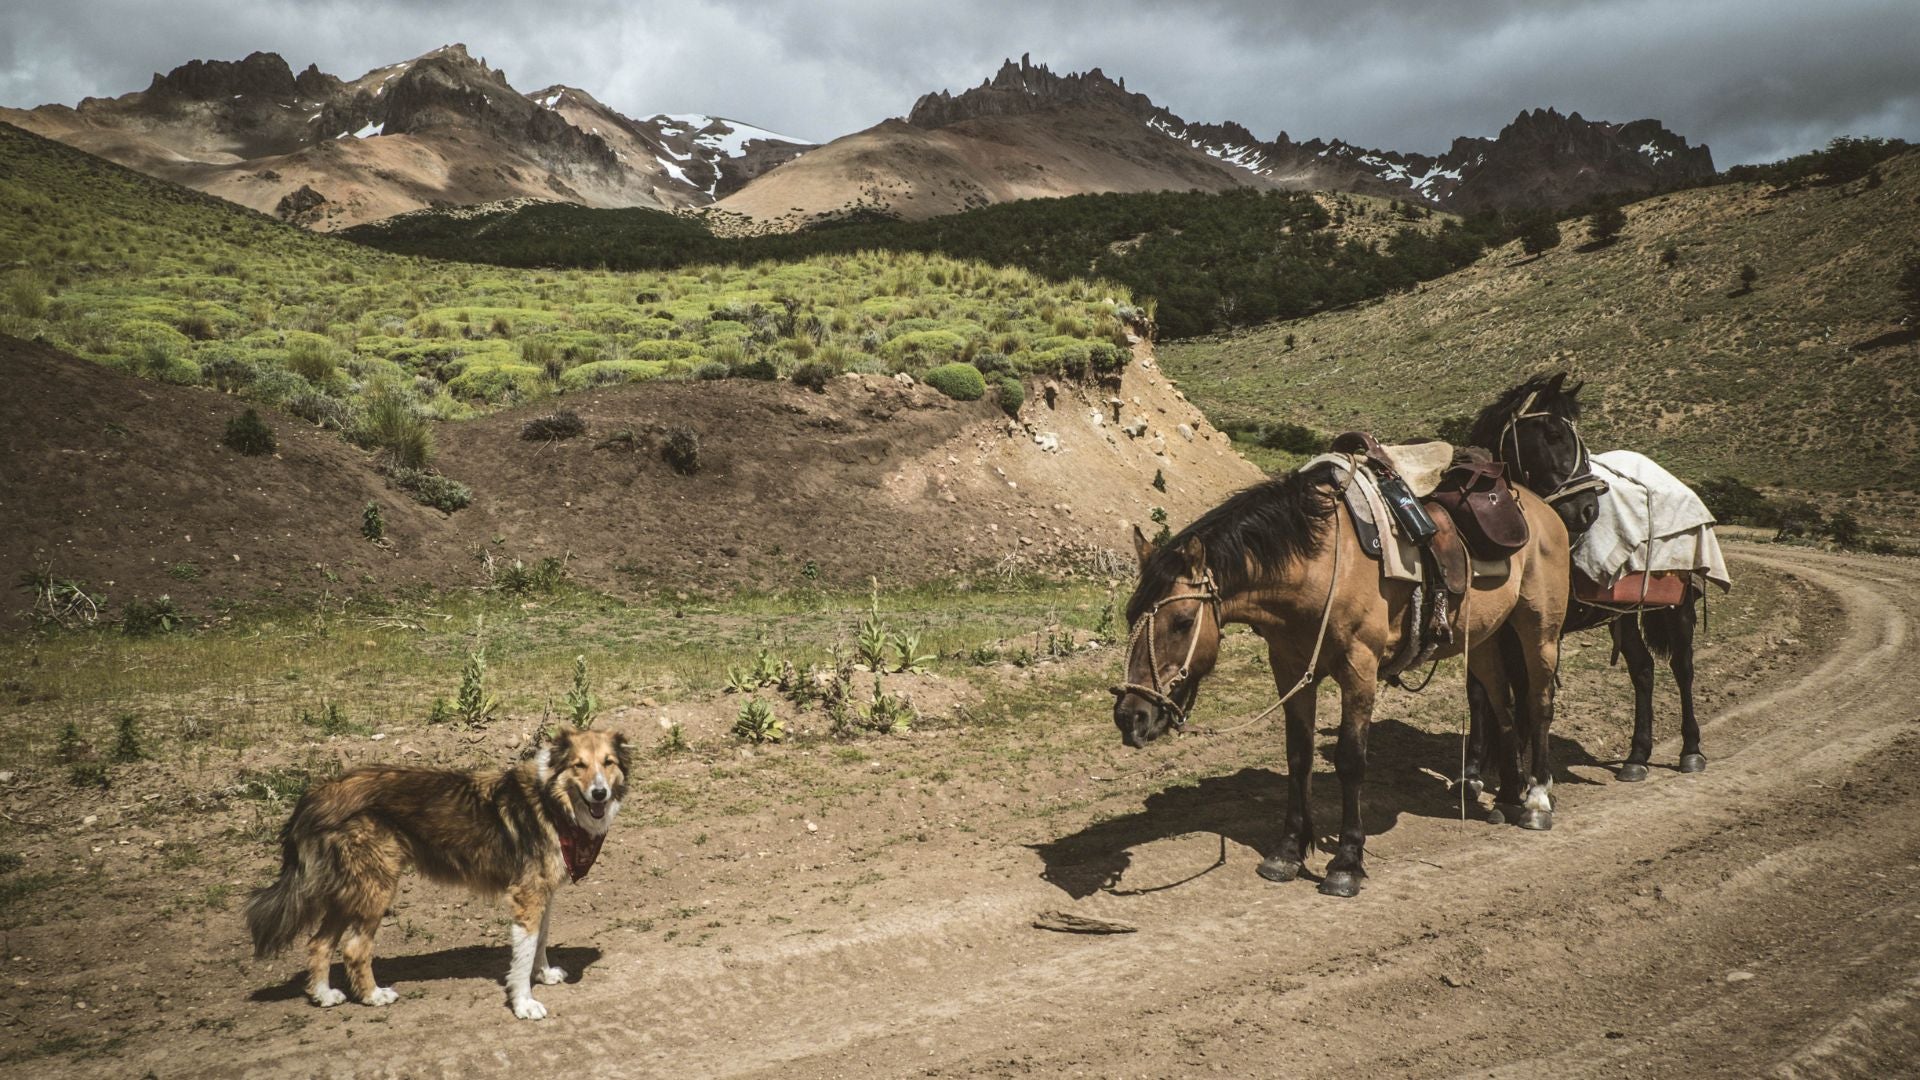 Dog and horse on expedition